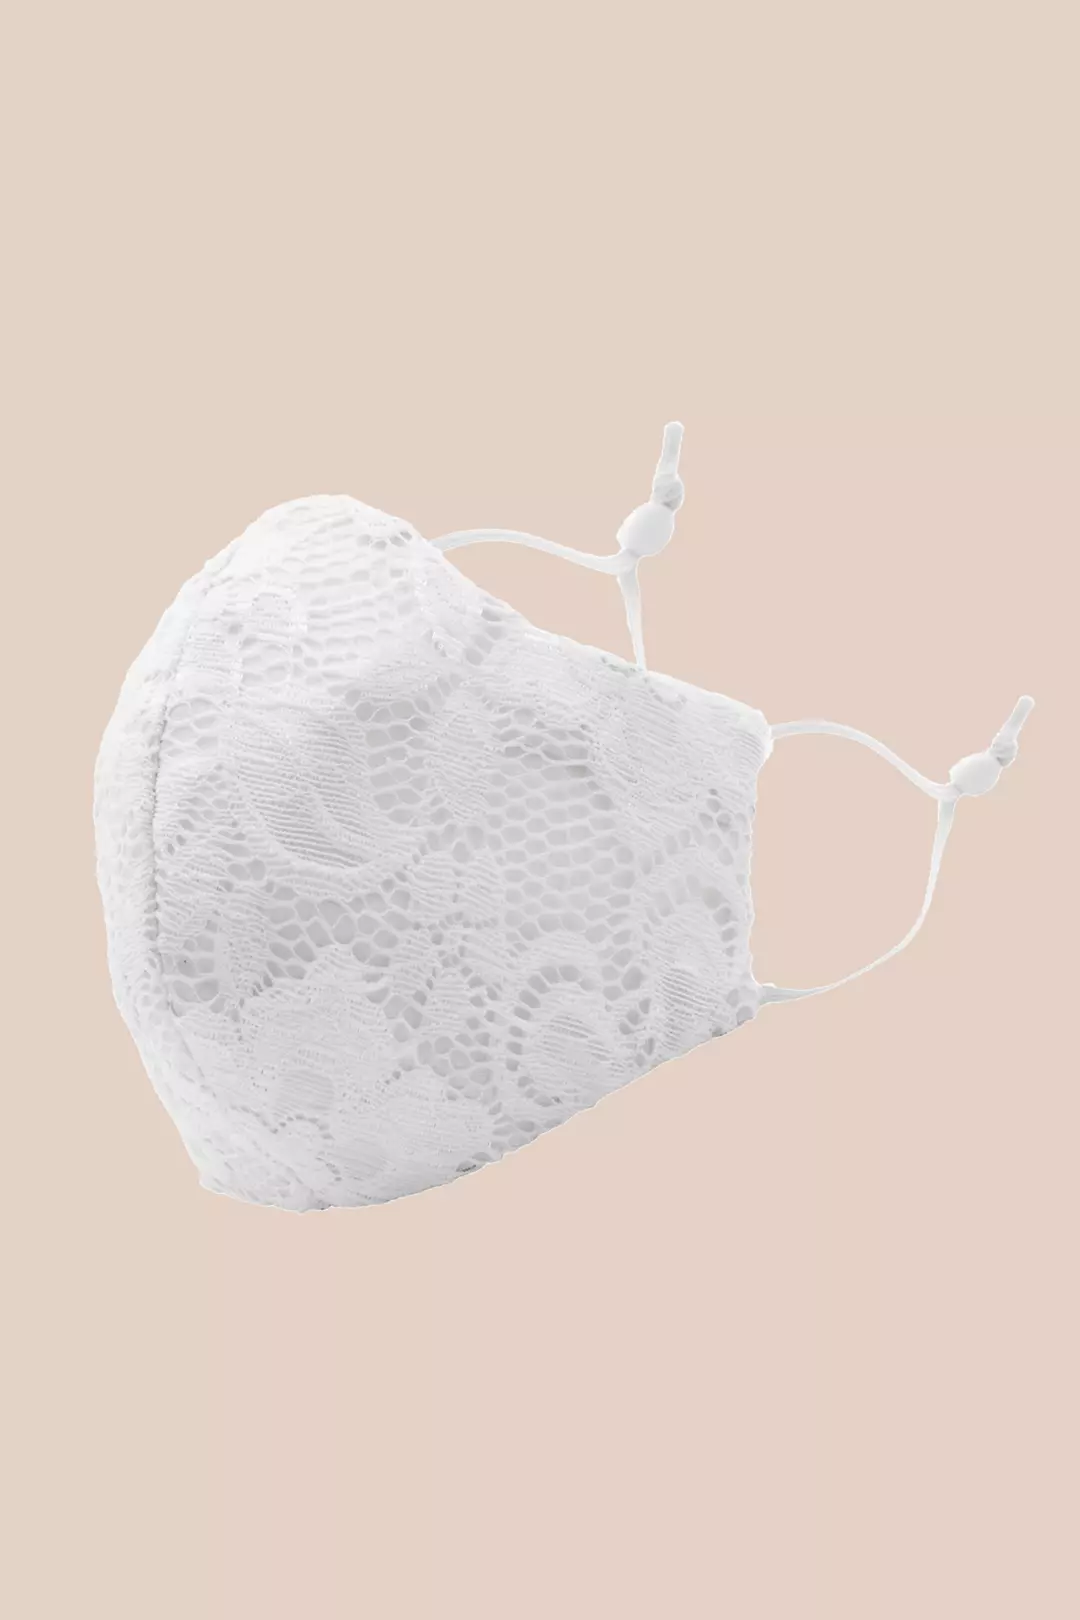 Lace Face Mask with Adjustable Loops Image 2